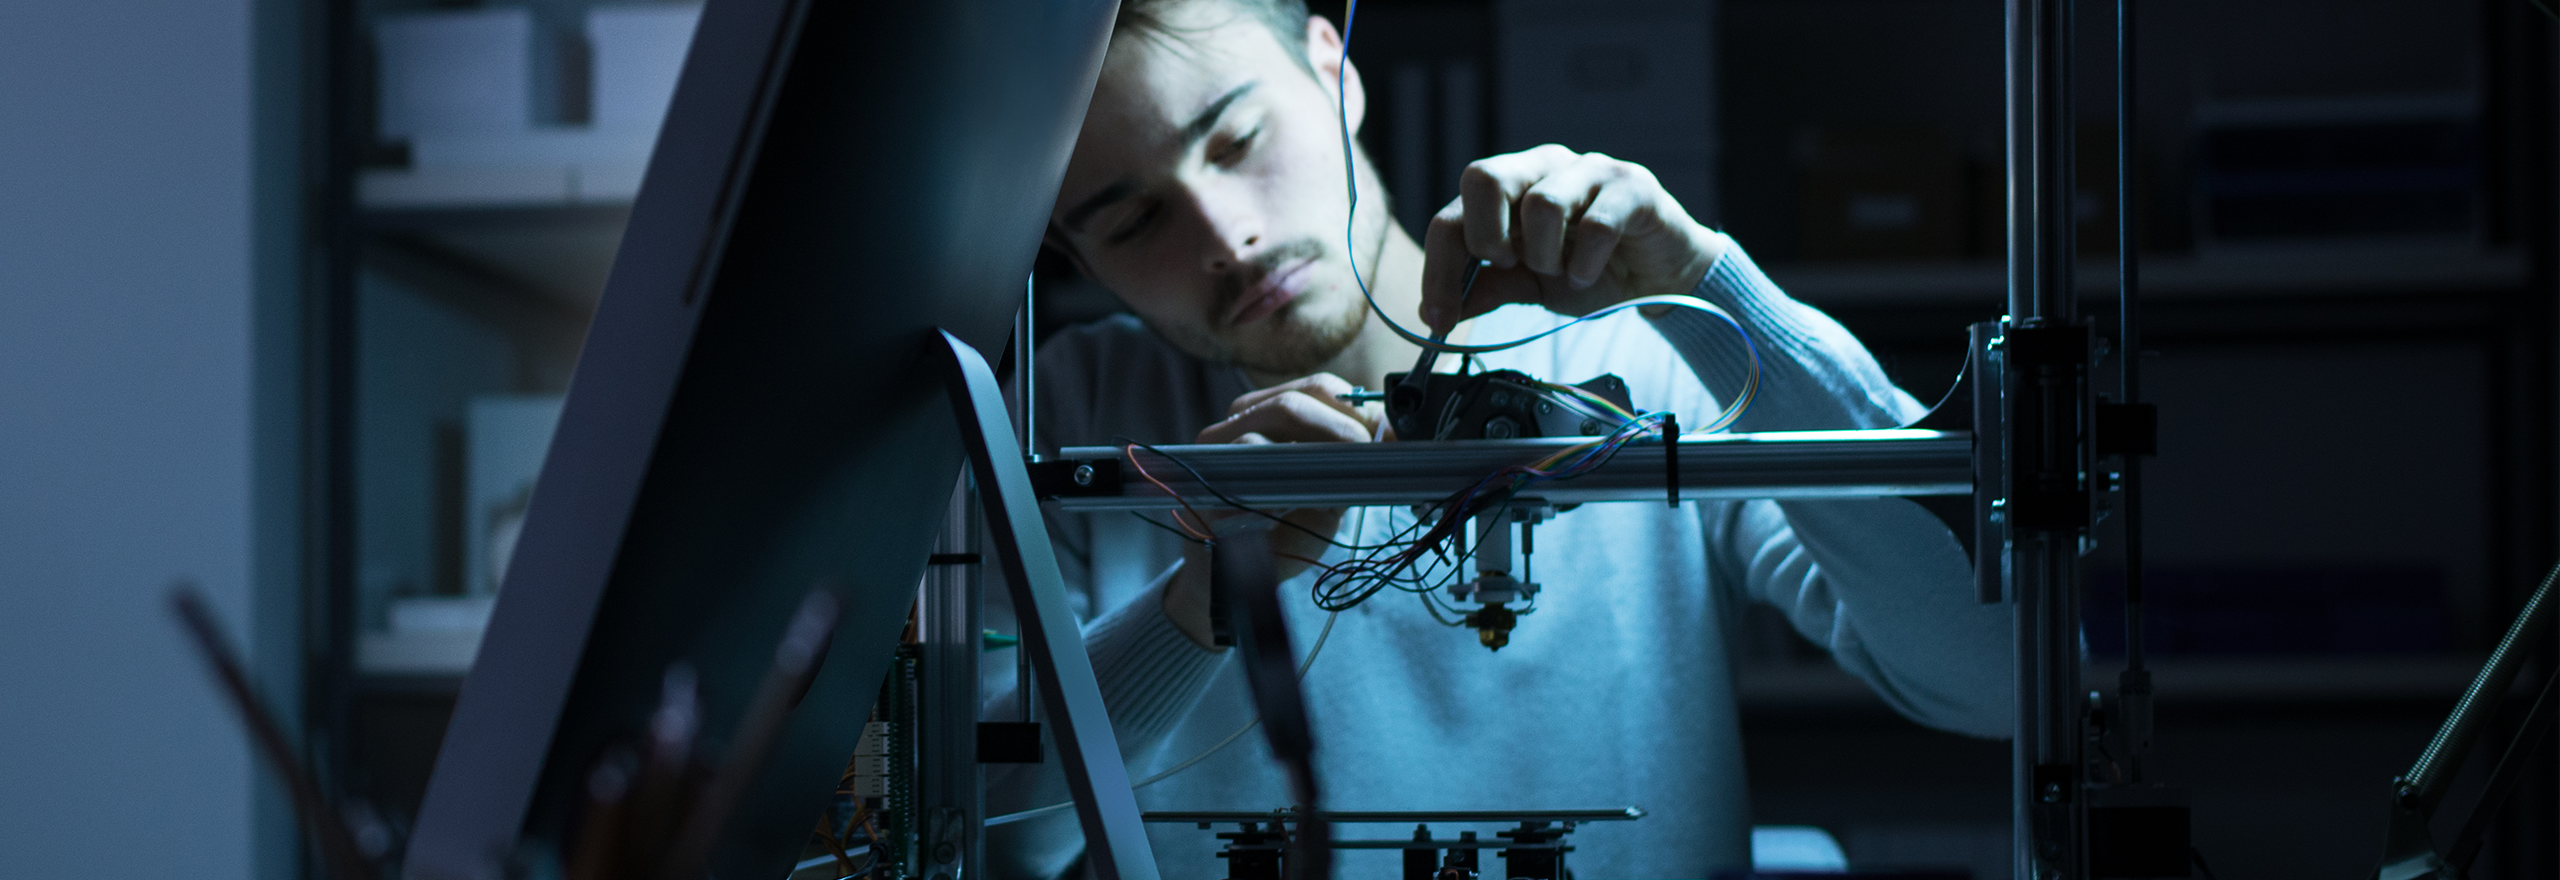 Operator working at a 3D printer to industrialise additive manufacturing